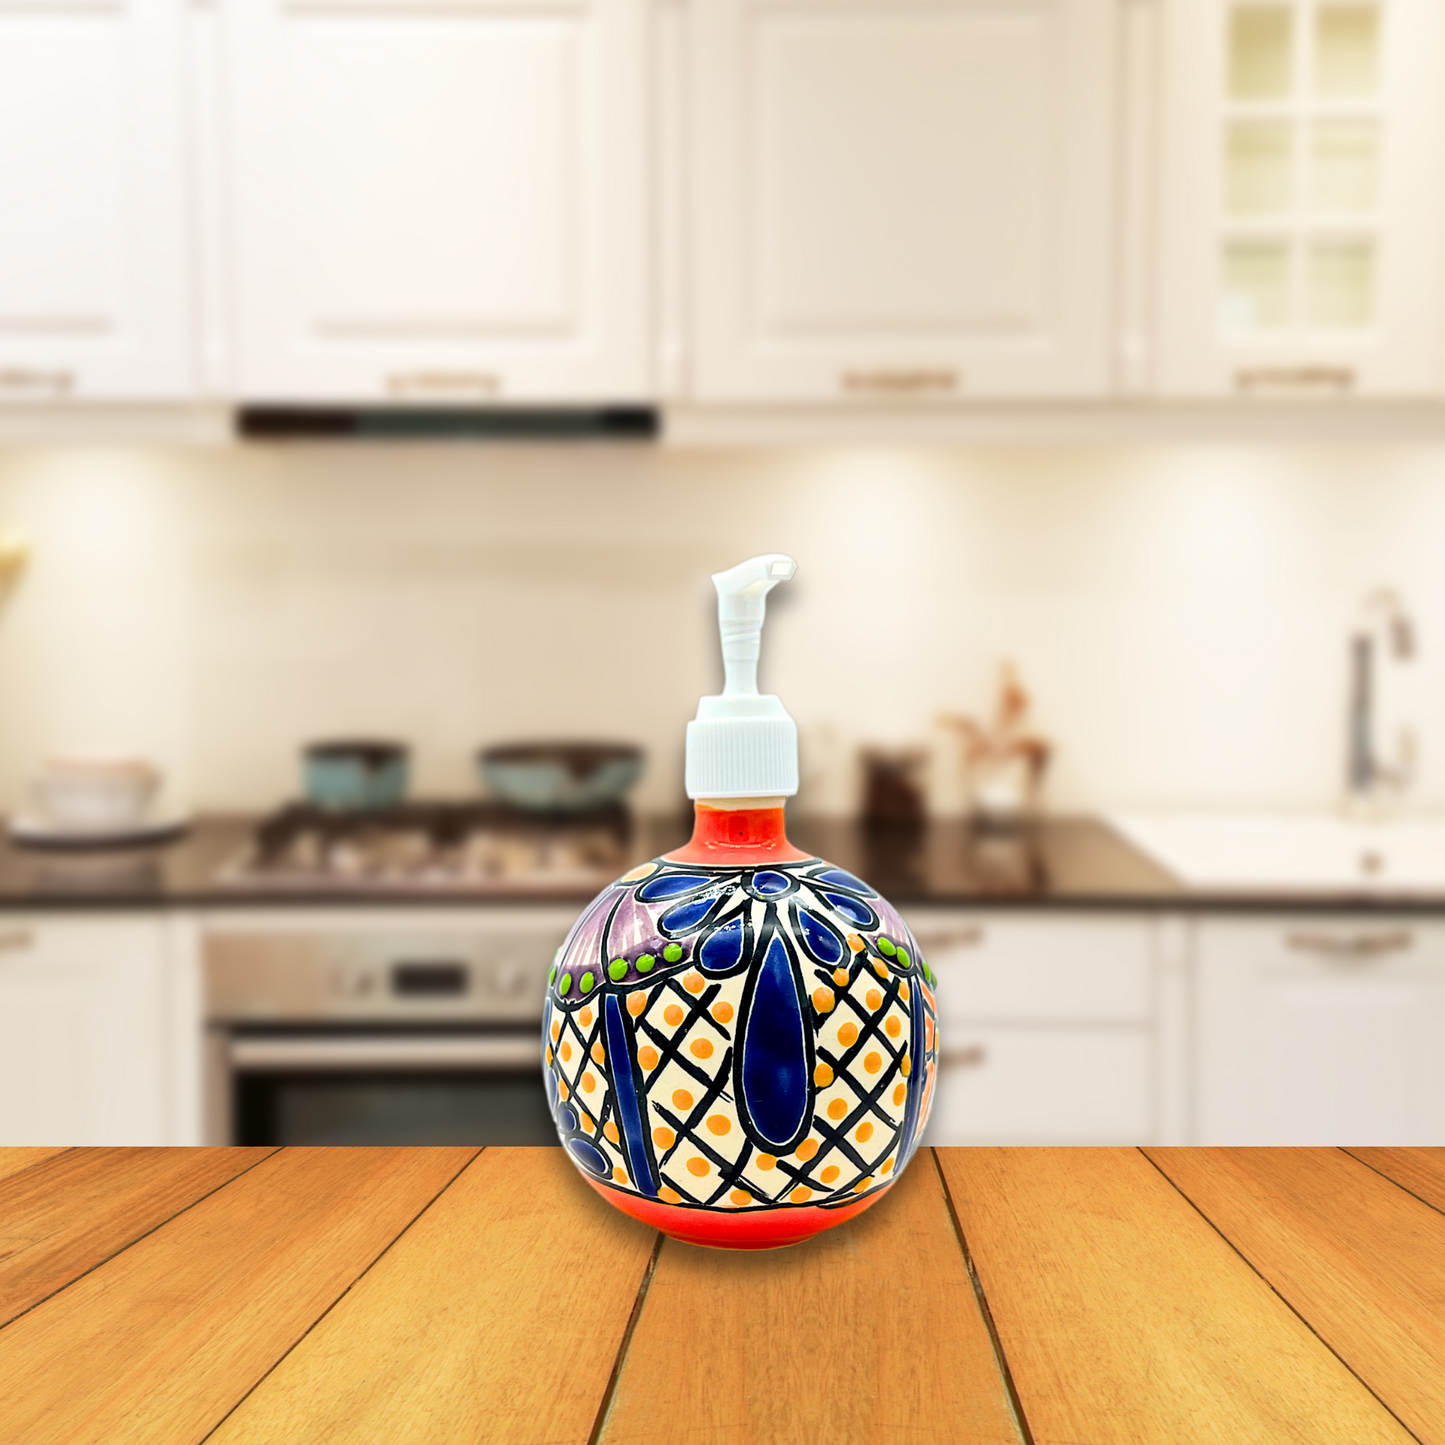 Hand-painted Talavera Ceramic Soap Dispenser in vibrant colors, an artistic addition to kitchen or bathroom. lifestyle photo